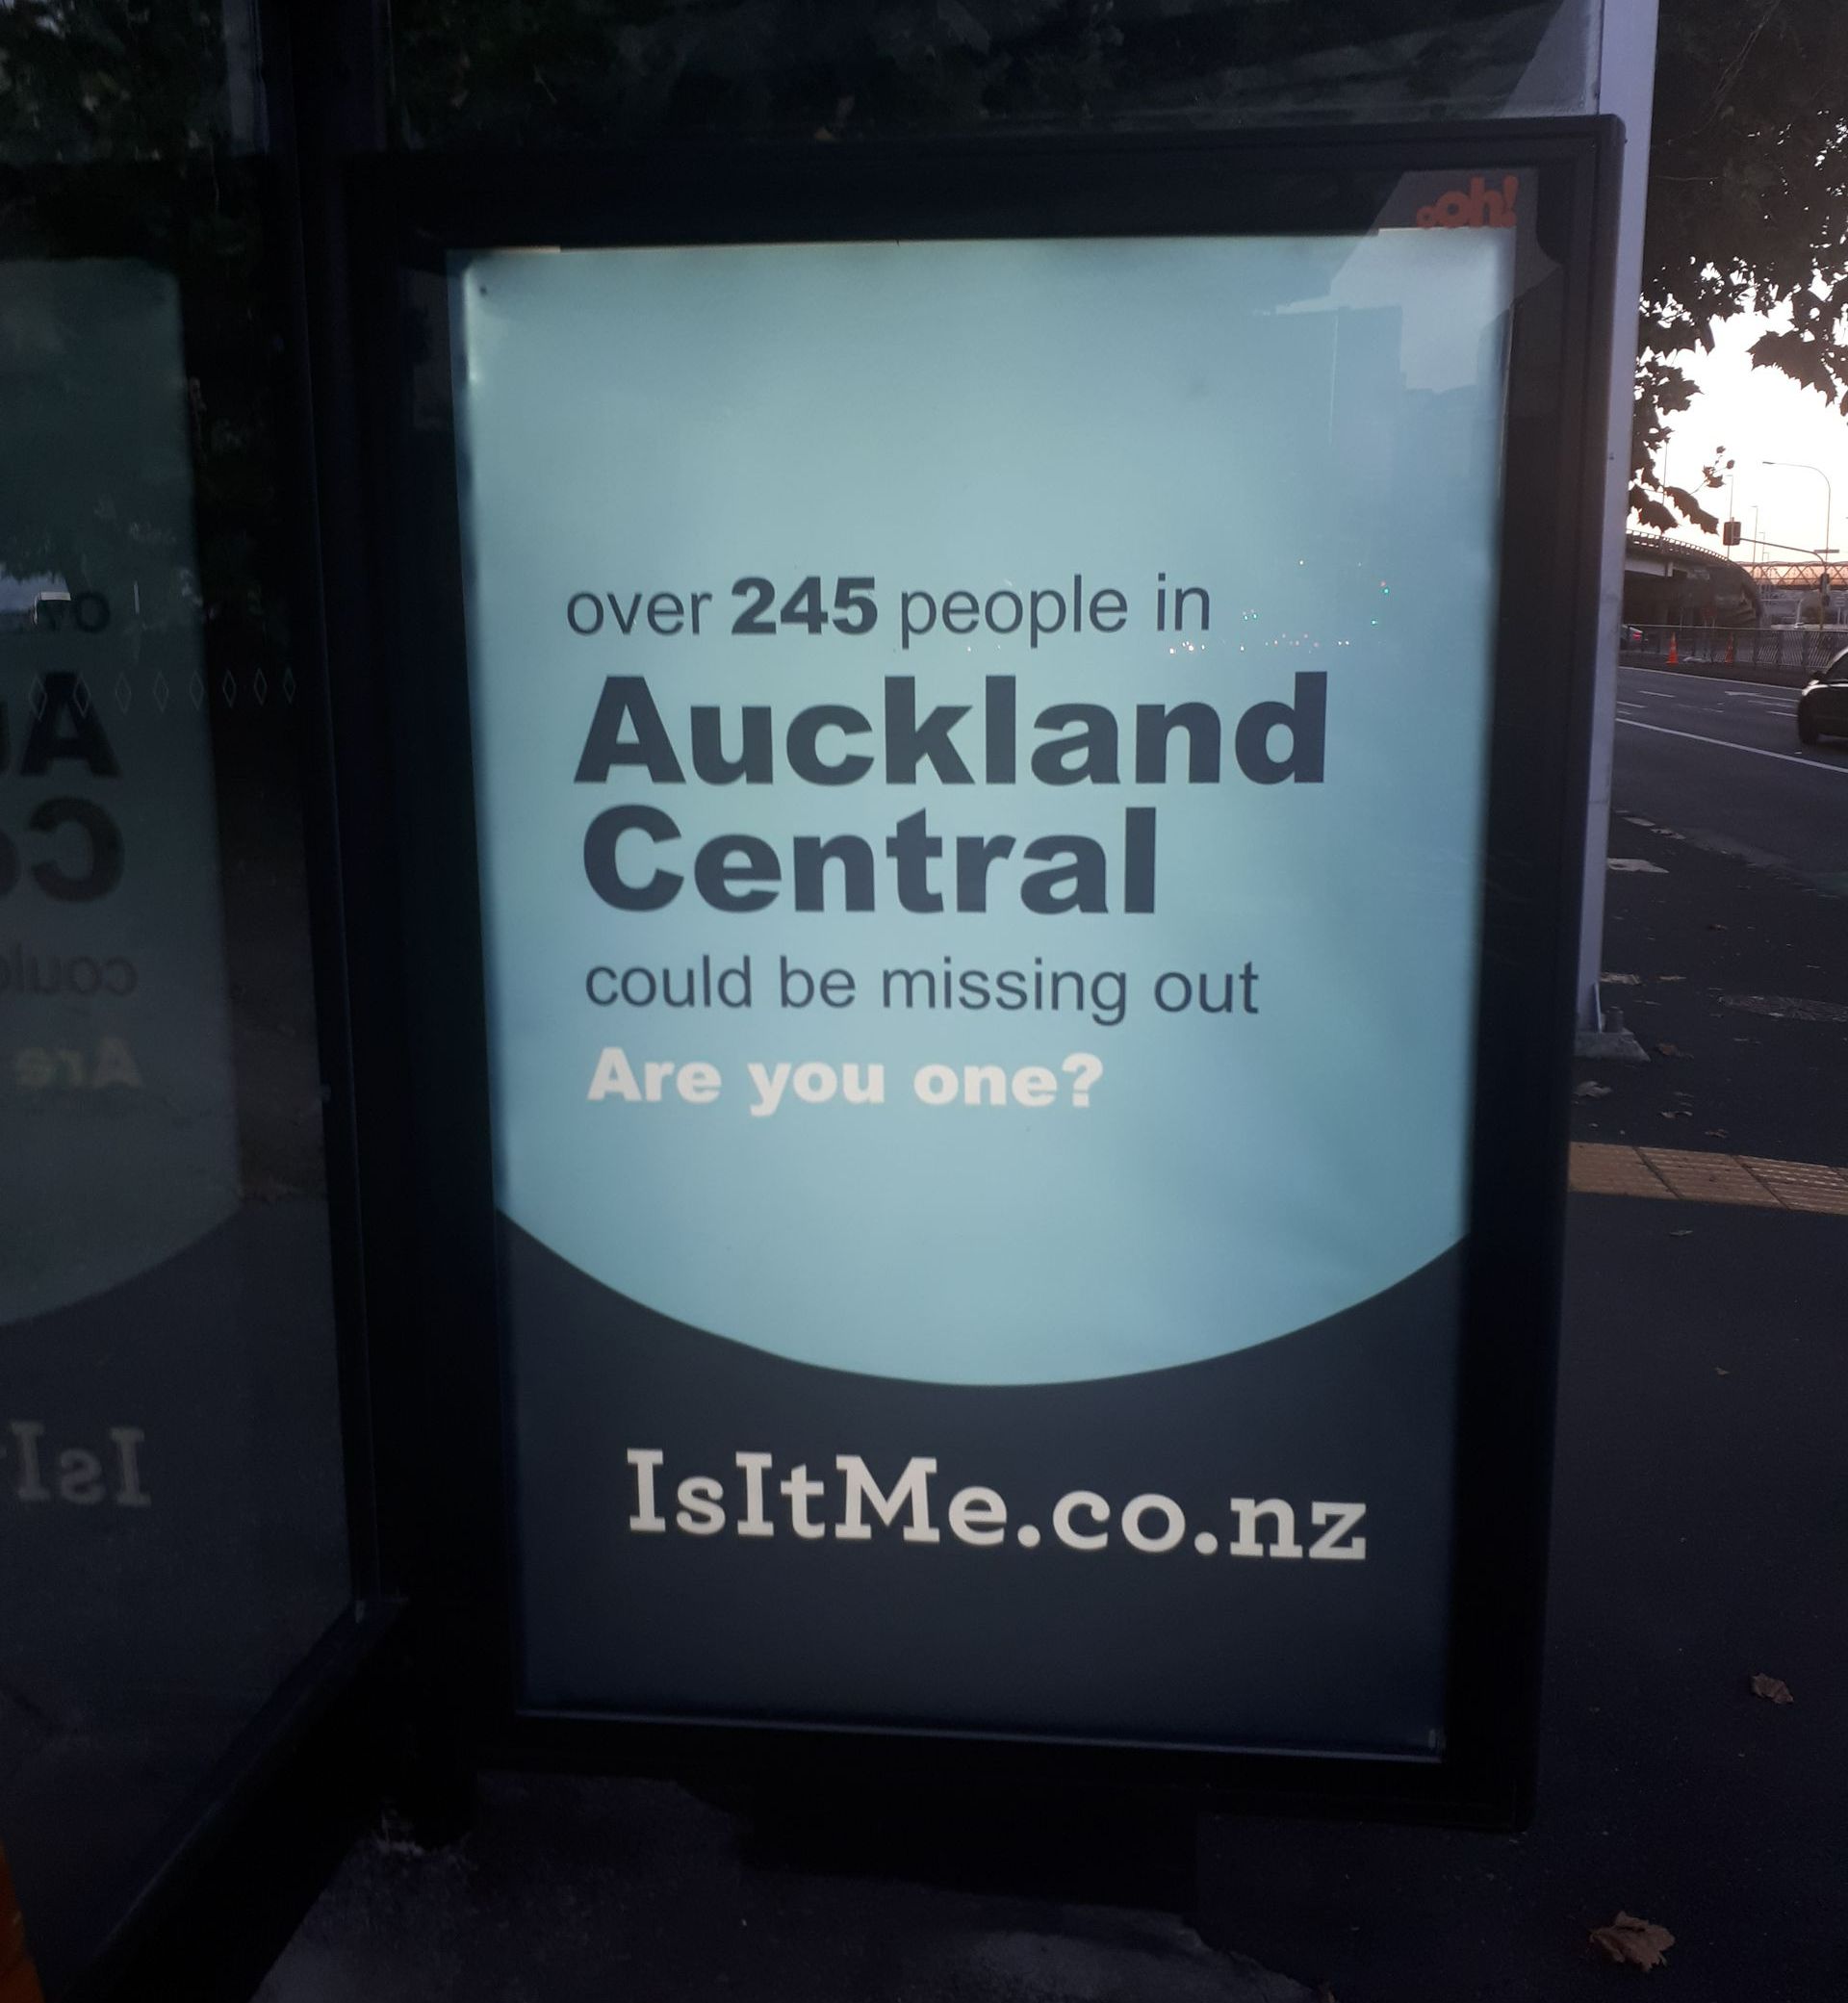 Image of Auckland bus shelter designed to encourage switching of retirement savings plan